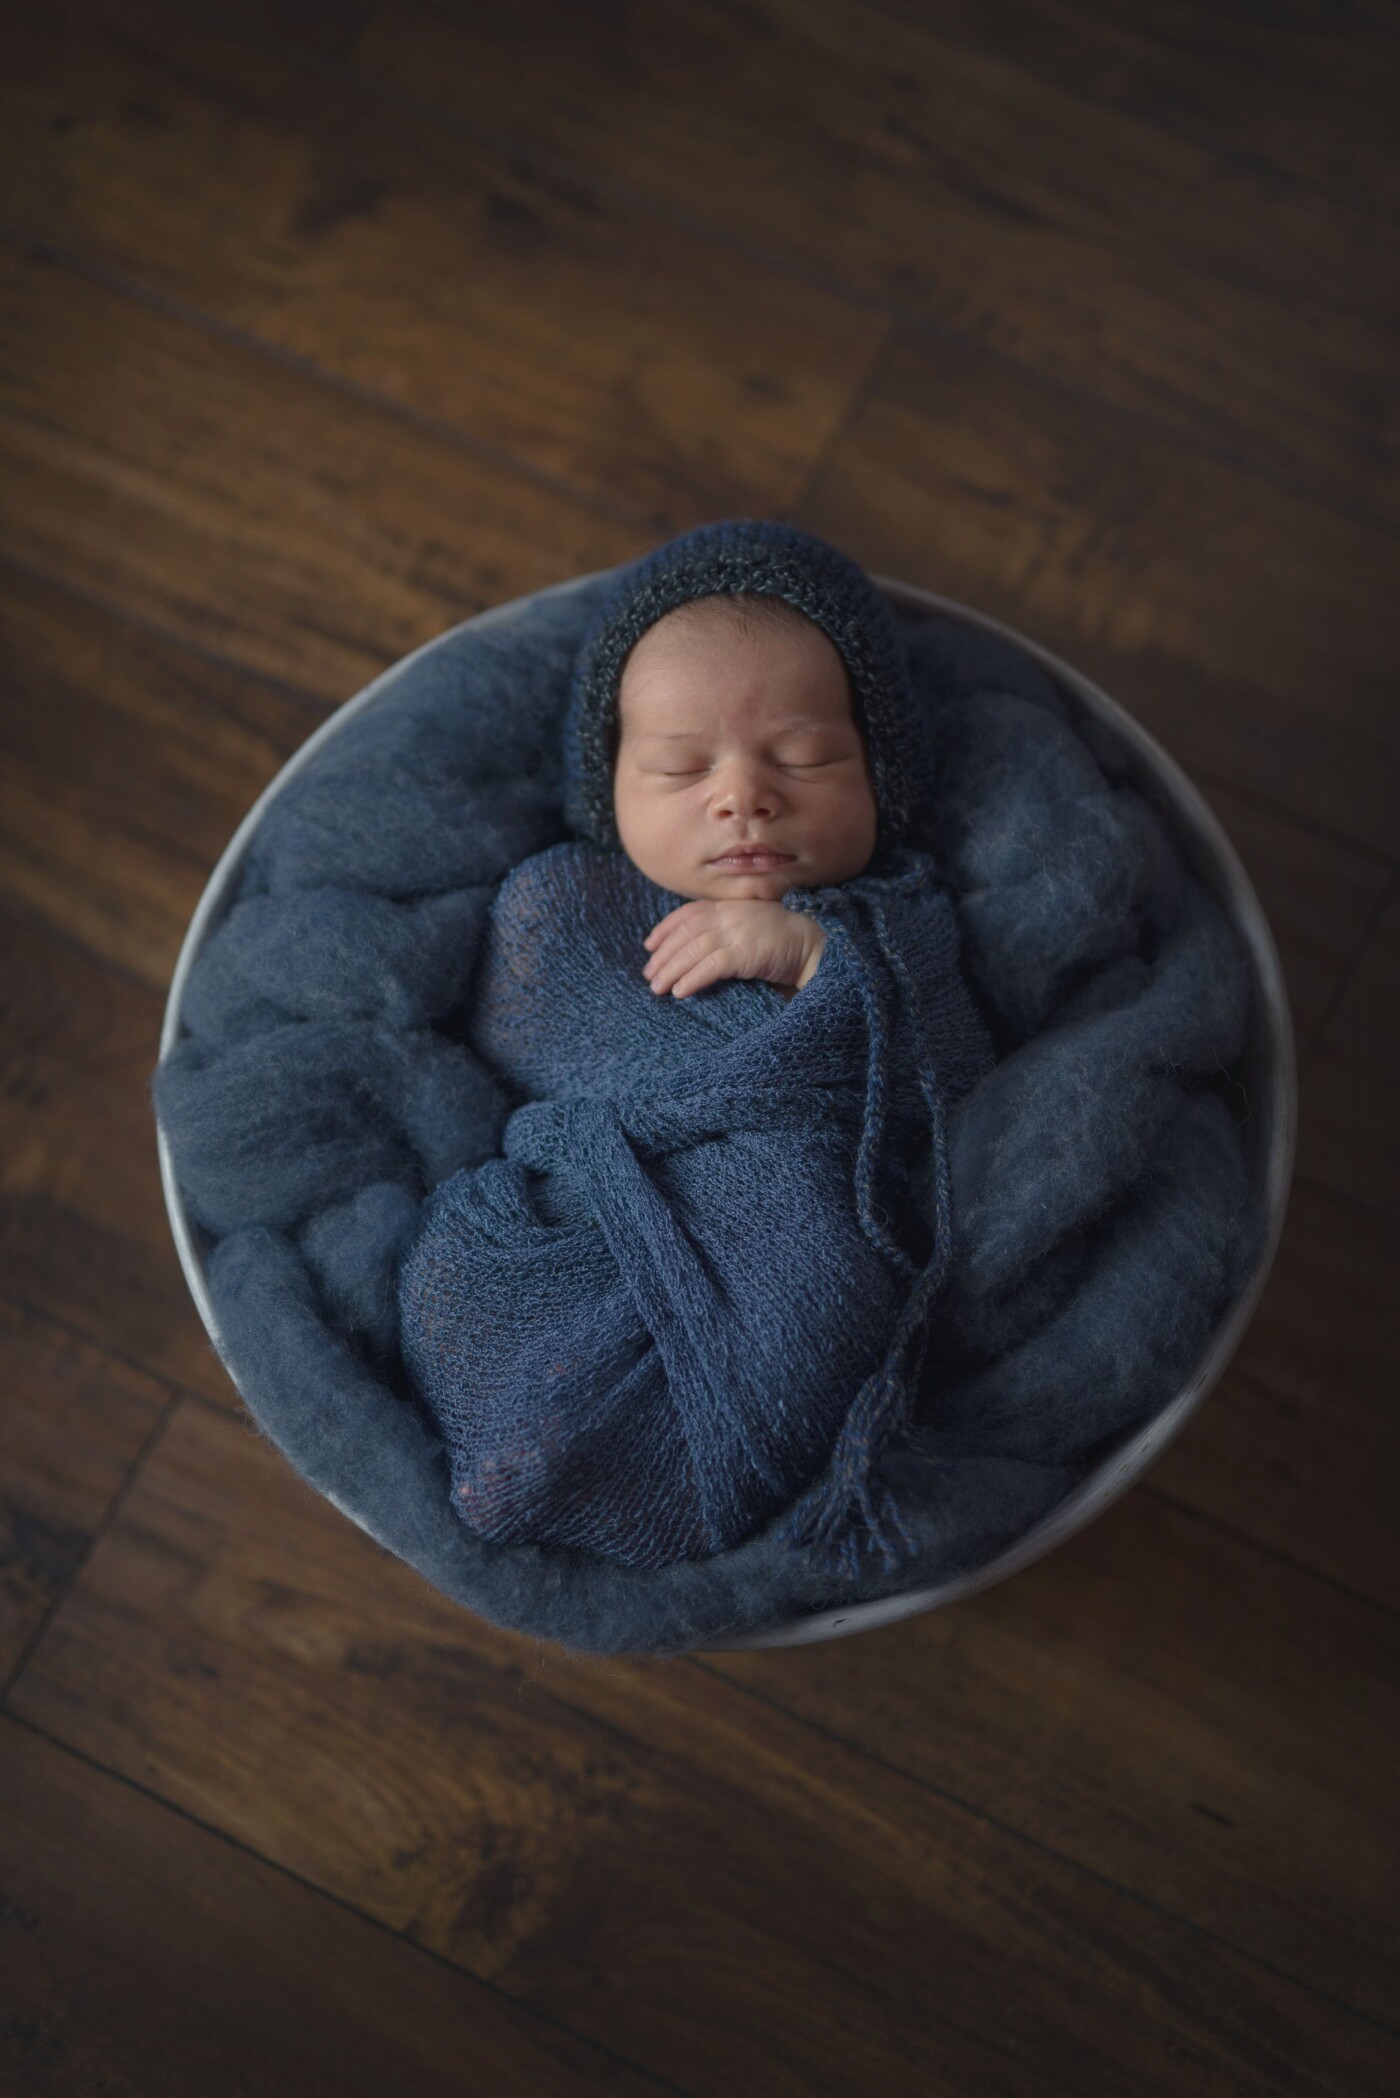 this little man is one of the first visitors to my new home studio, he was just the sweetest little baby ever. I have been dreaming about a home studio for years and now I finally am able to do the type of newborn photography I dream about. It's the best feeling in the world to follow your dreams and they start to be realized.